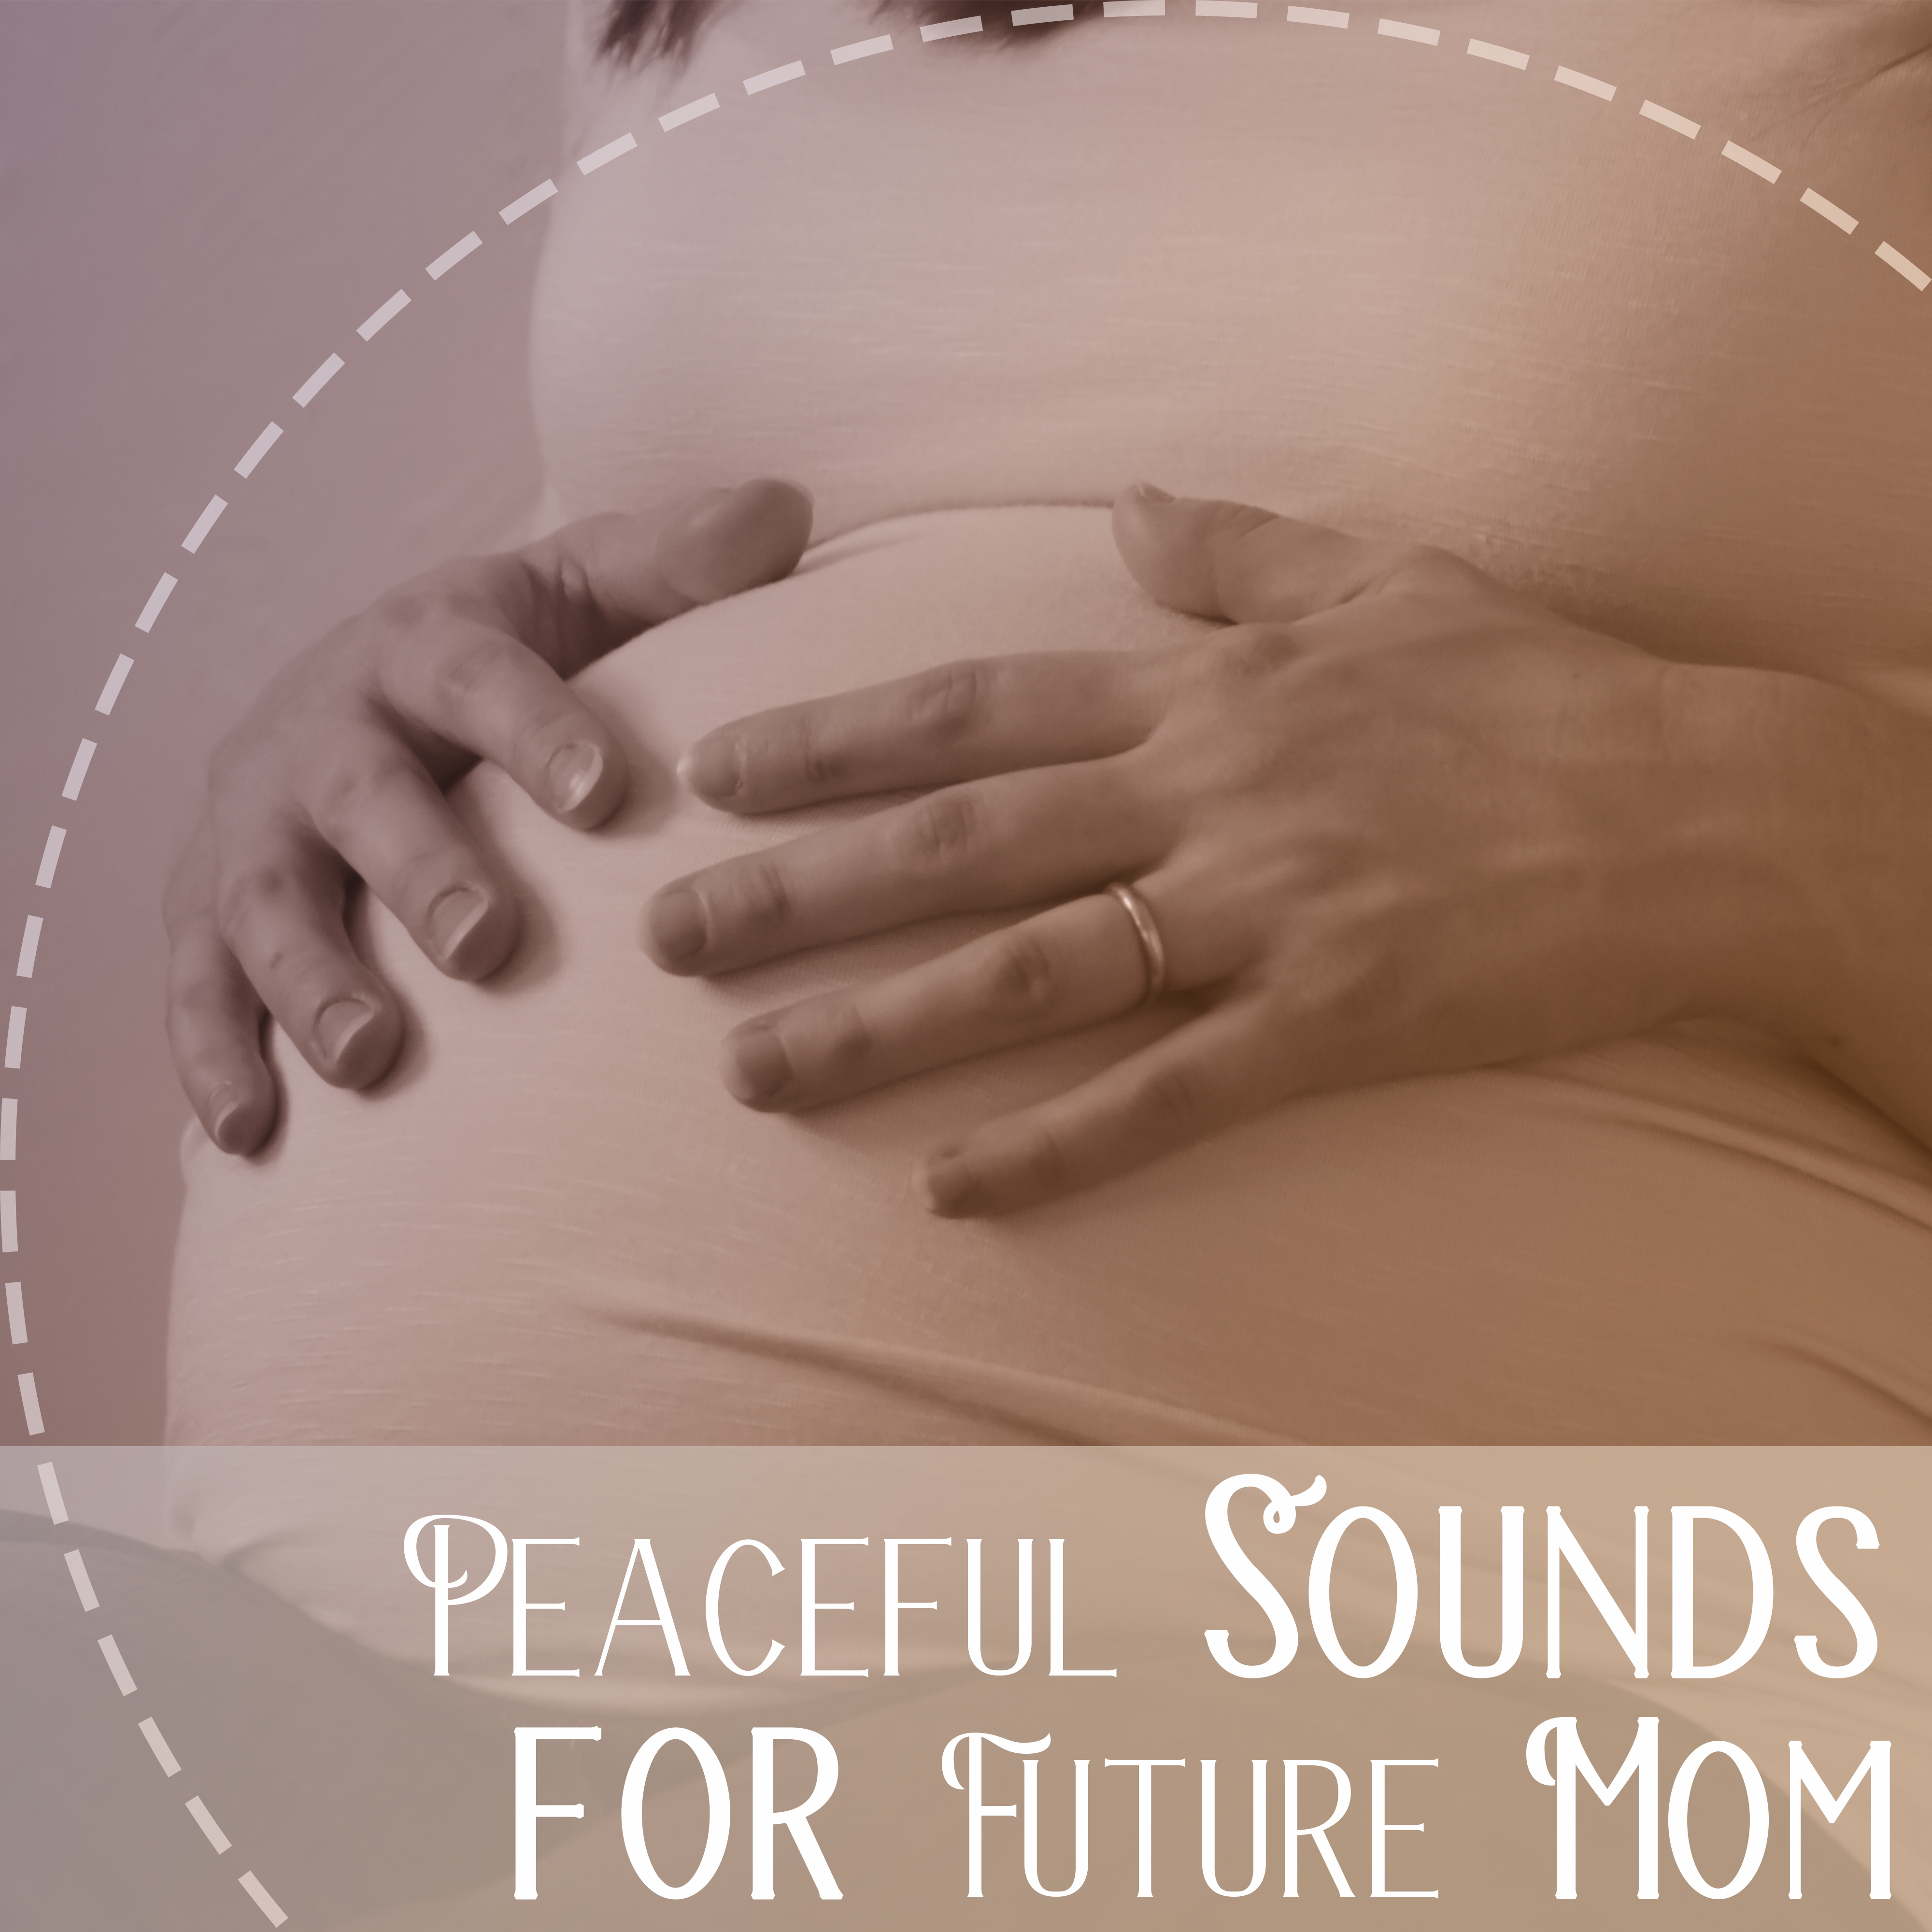 Peaceful Sounds for Future Mom  Soothing Music, Calm Newborn, Music for Pregnant Woman, Deep Sleep, Calmness